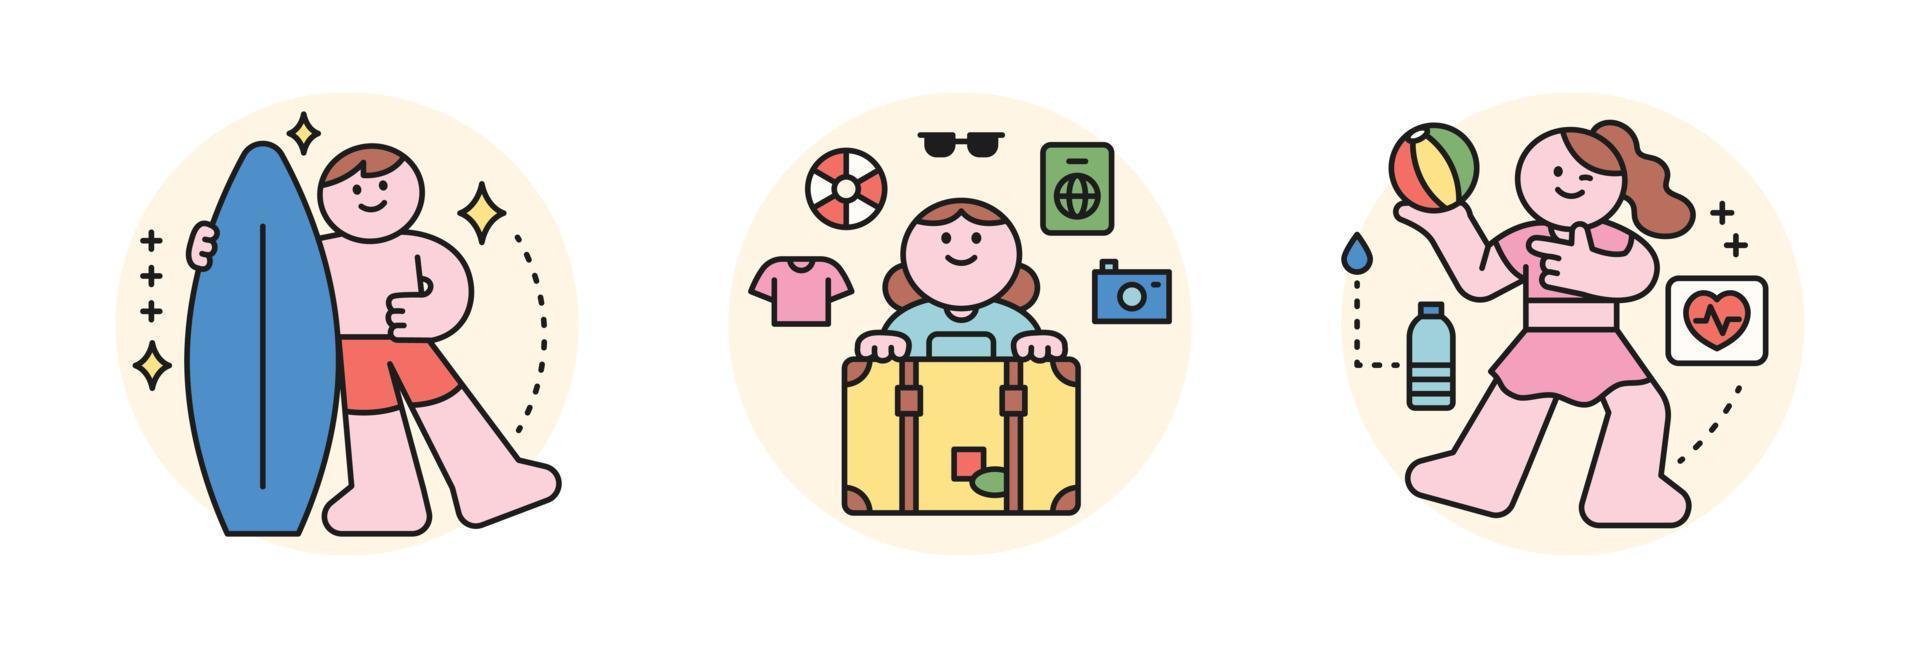 People enjoying summer. outline style character design. A boy with a serving board, a girl packing a suitcase and a girl playing beach volleyball. vector